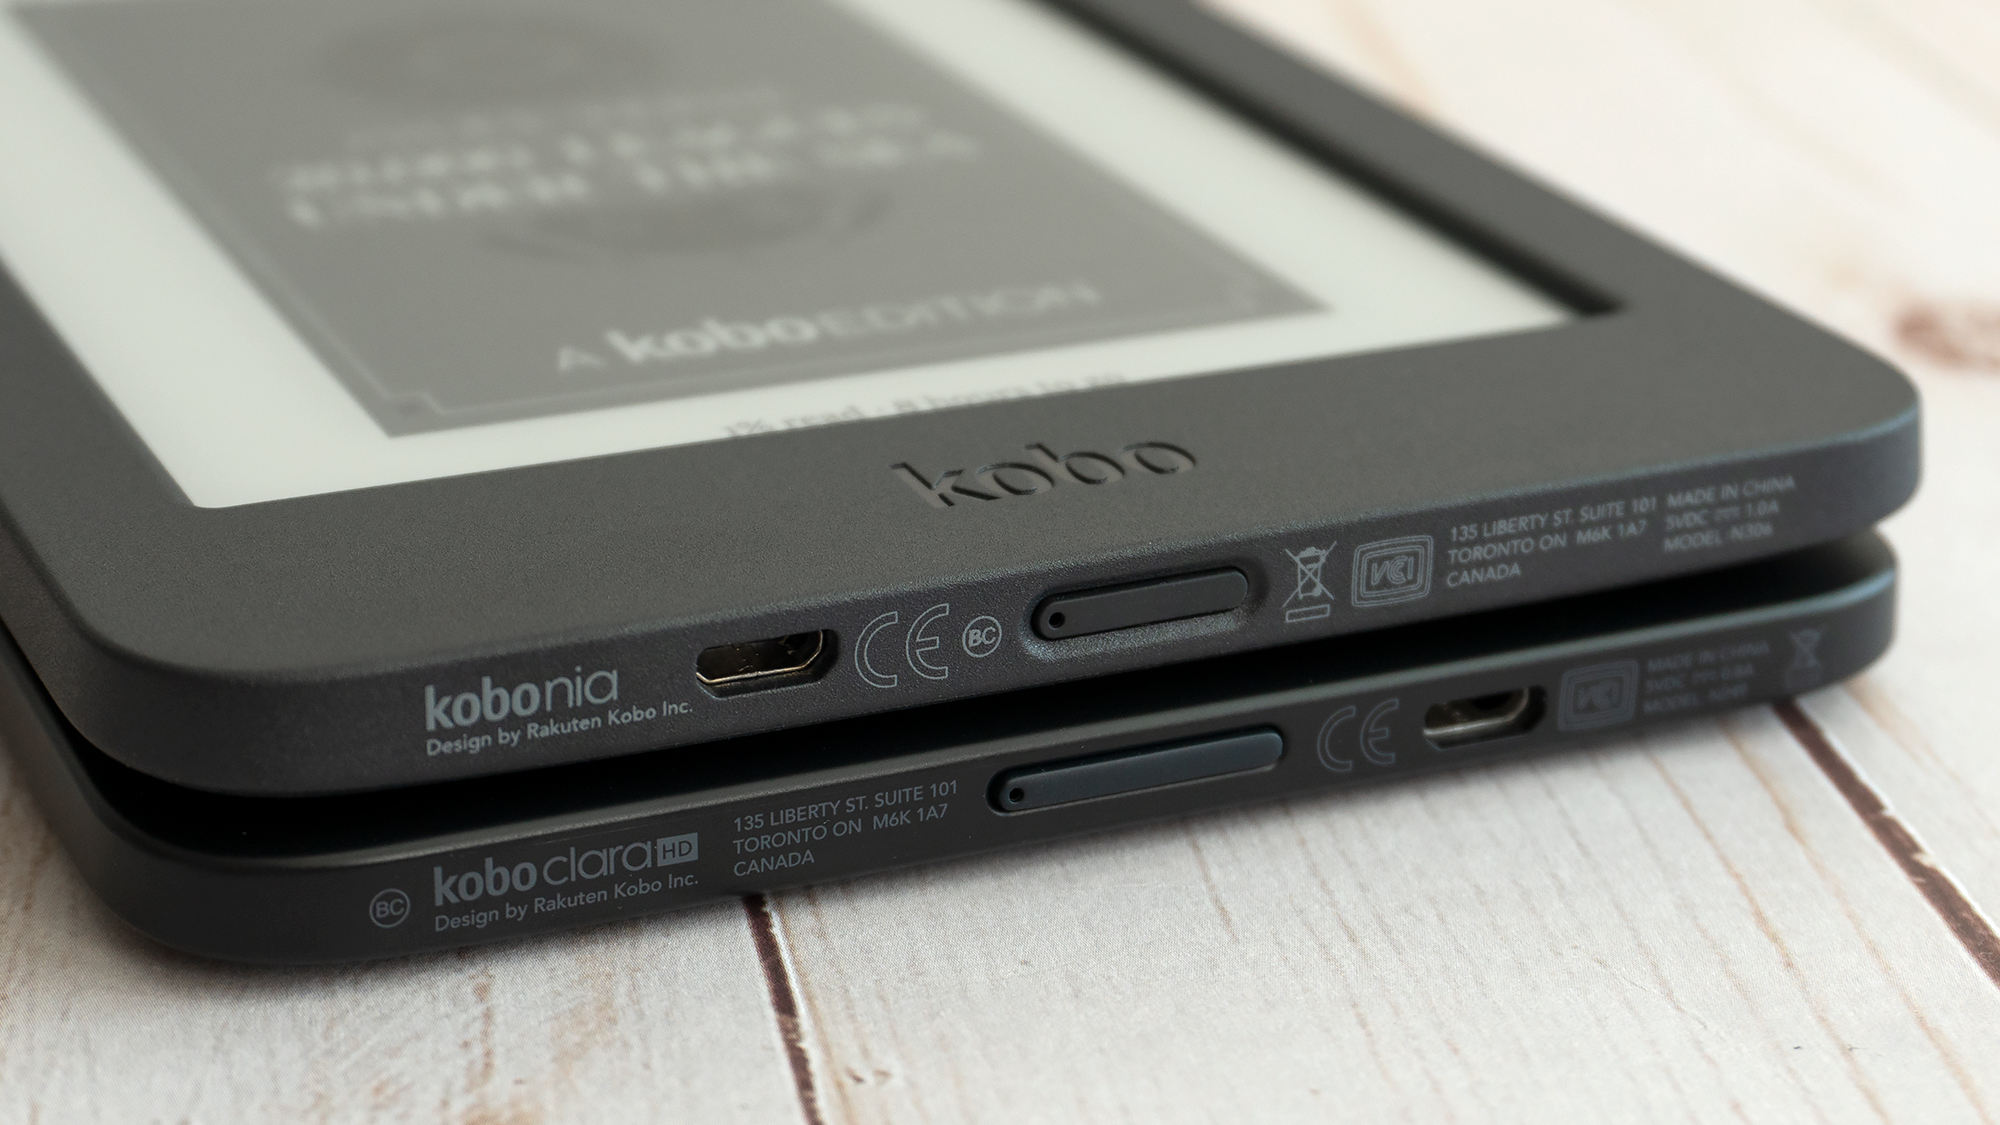 The new Kobo Nia (top) is slightly taller and thicker than the Kobo Clara HD (bottom) but the size differences are negligible. (Photo: Andrew Liszewski (Gizmodo)